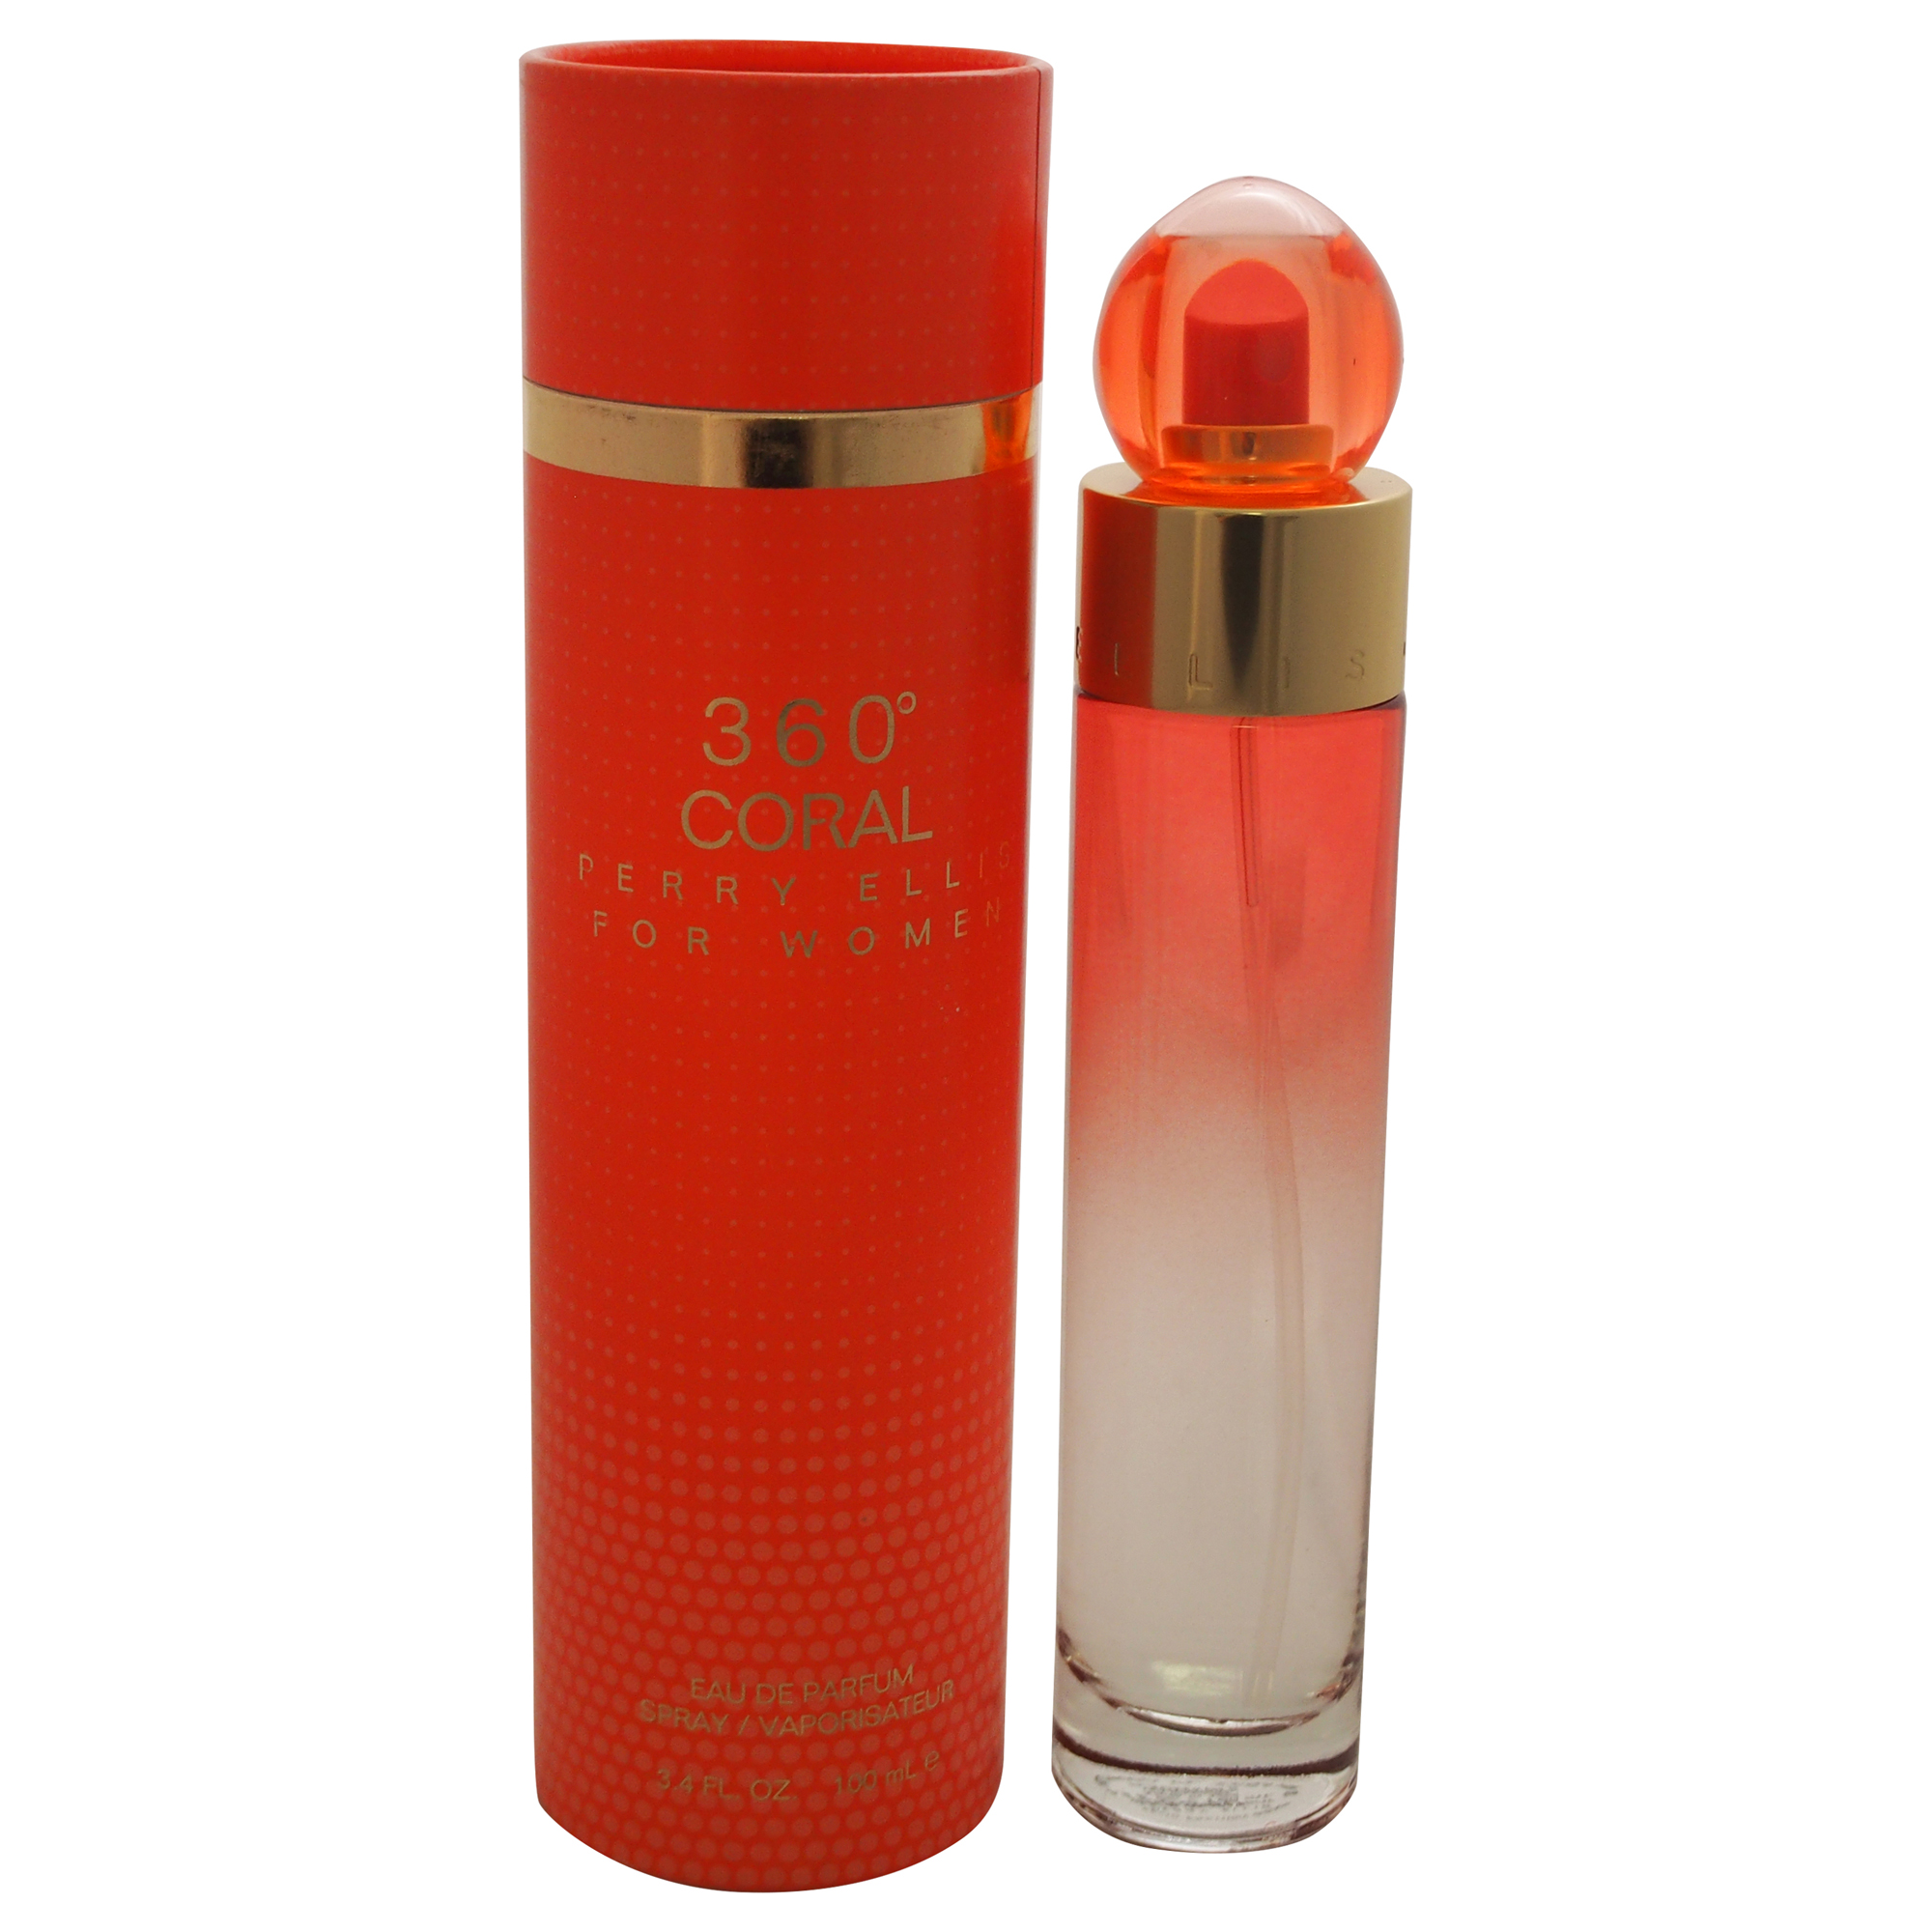 360 Coral by Perry Ellis for Women - 3.4 oz EDP Spray